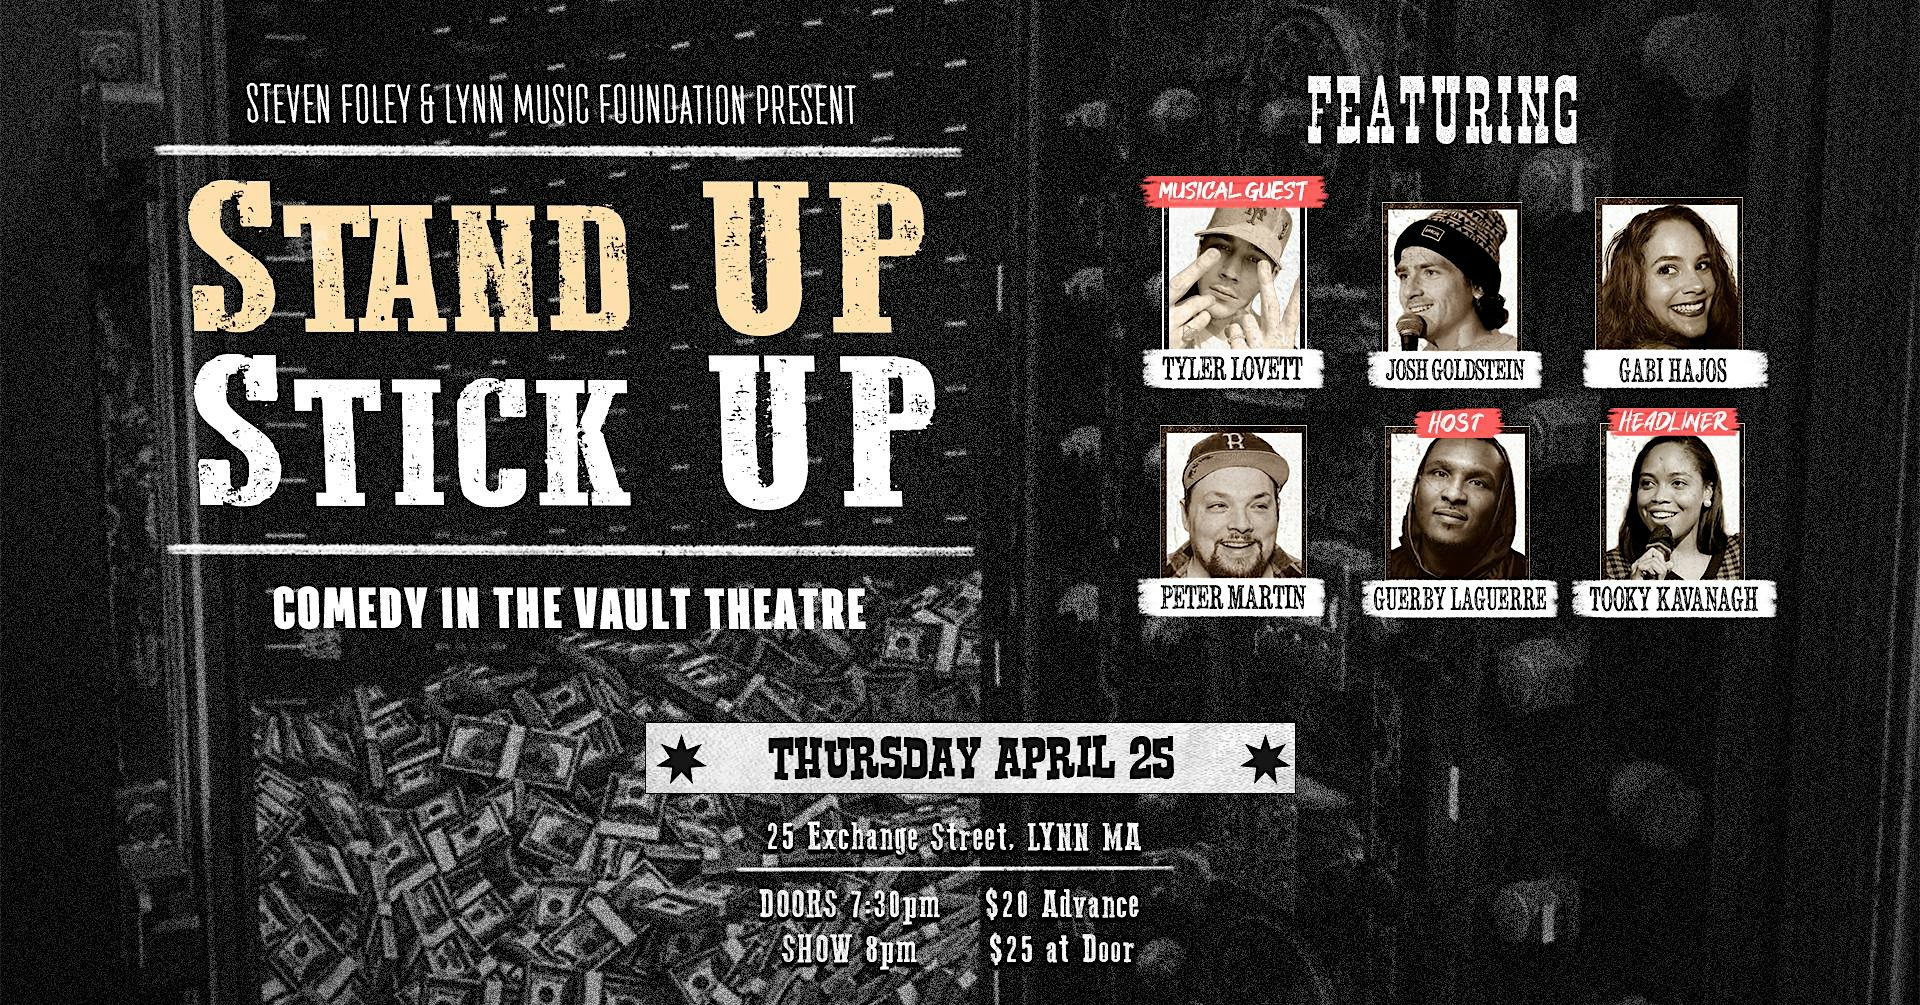 Join us for a laughter-filled evening at "Stand Up Stick Up" comedy show at the Vault Theatre on April 25th. Enjoy performances from a variety of comedians who promise a night full of entertainment. Find all information about admission and more right here!